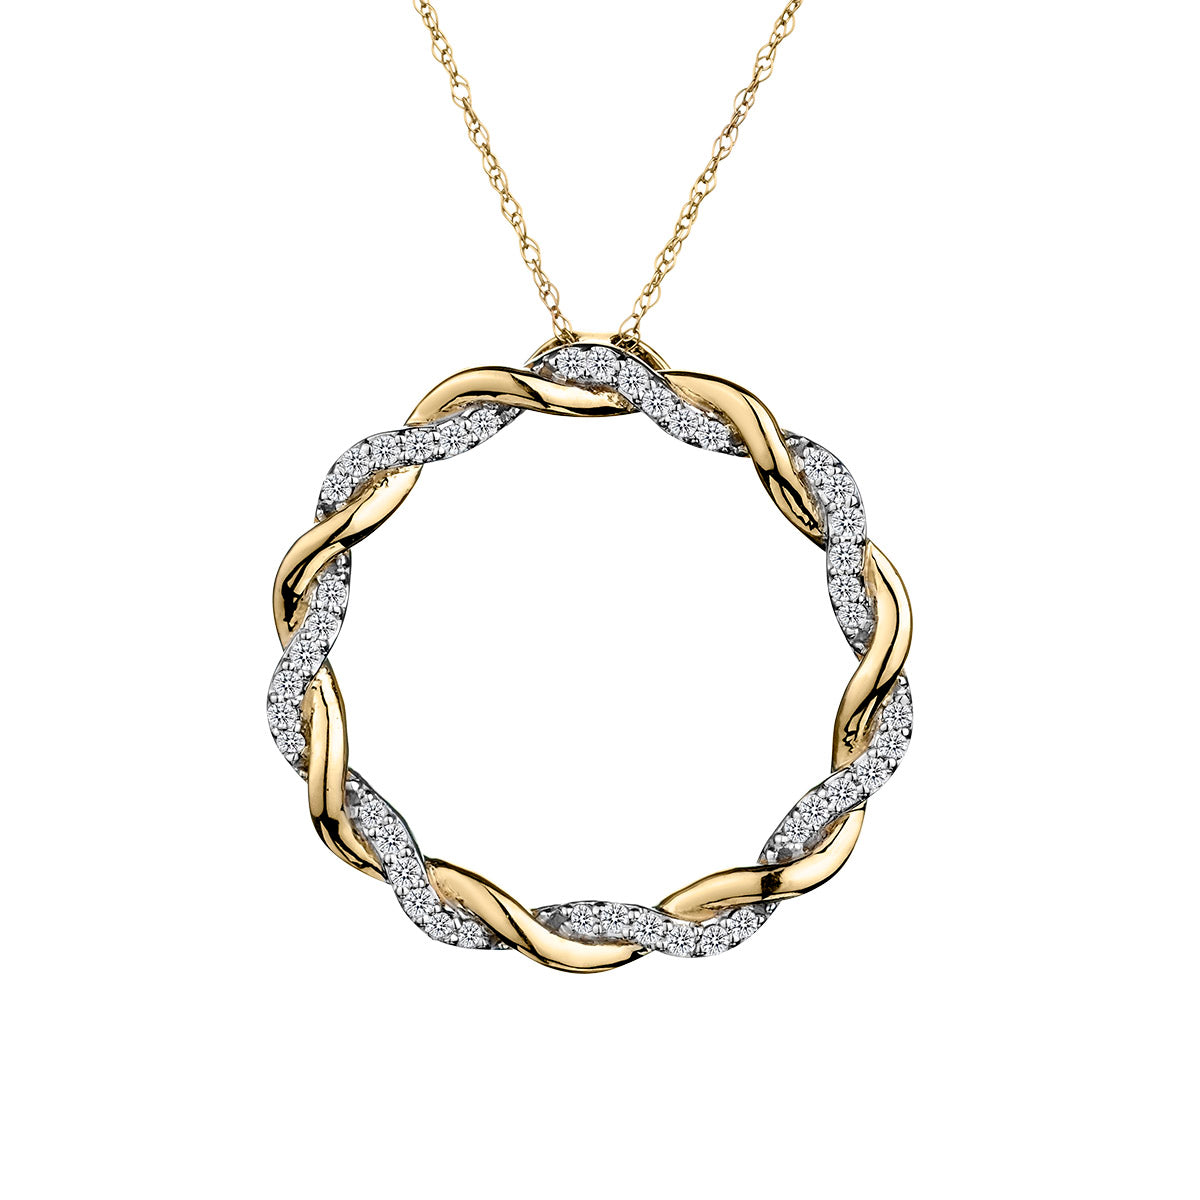 .20 Carat of Diamonds "Circle of Love" Pendant,  10kt Yellow Gold.  Necklaces and Pendants. Griffin Jewellery Designs.